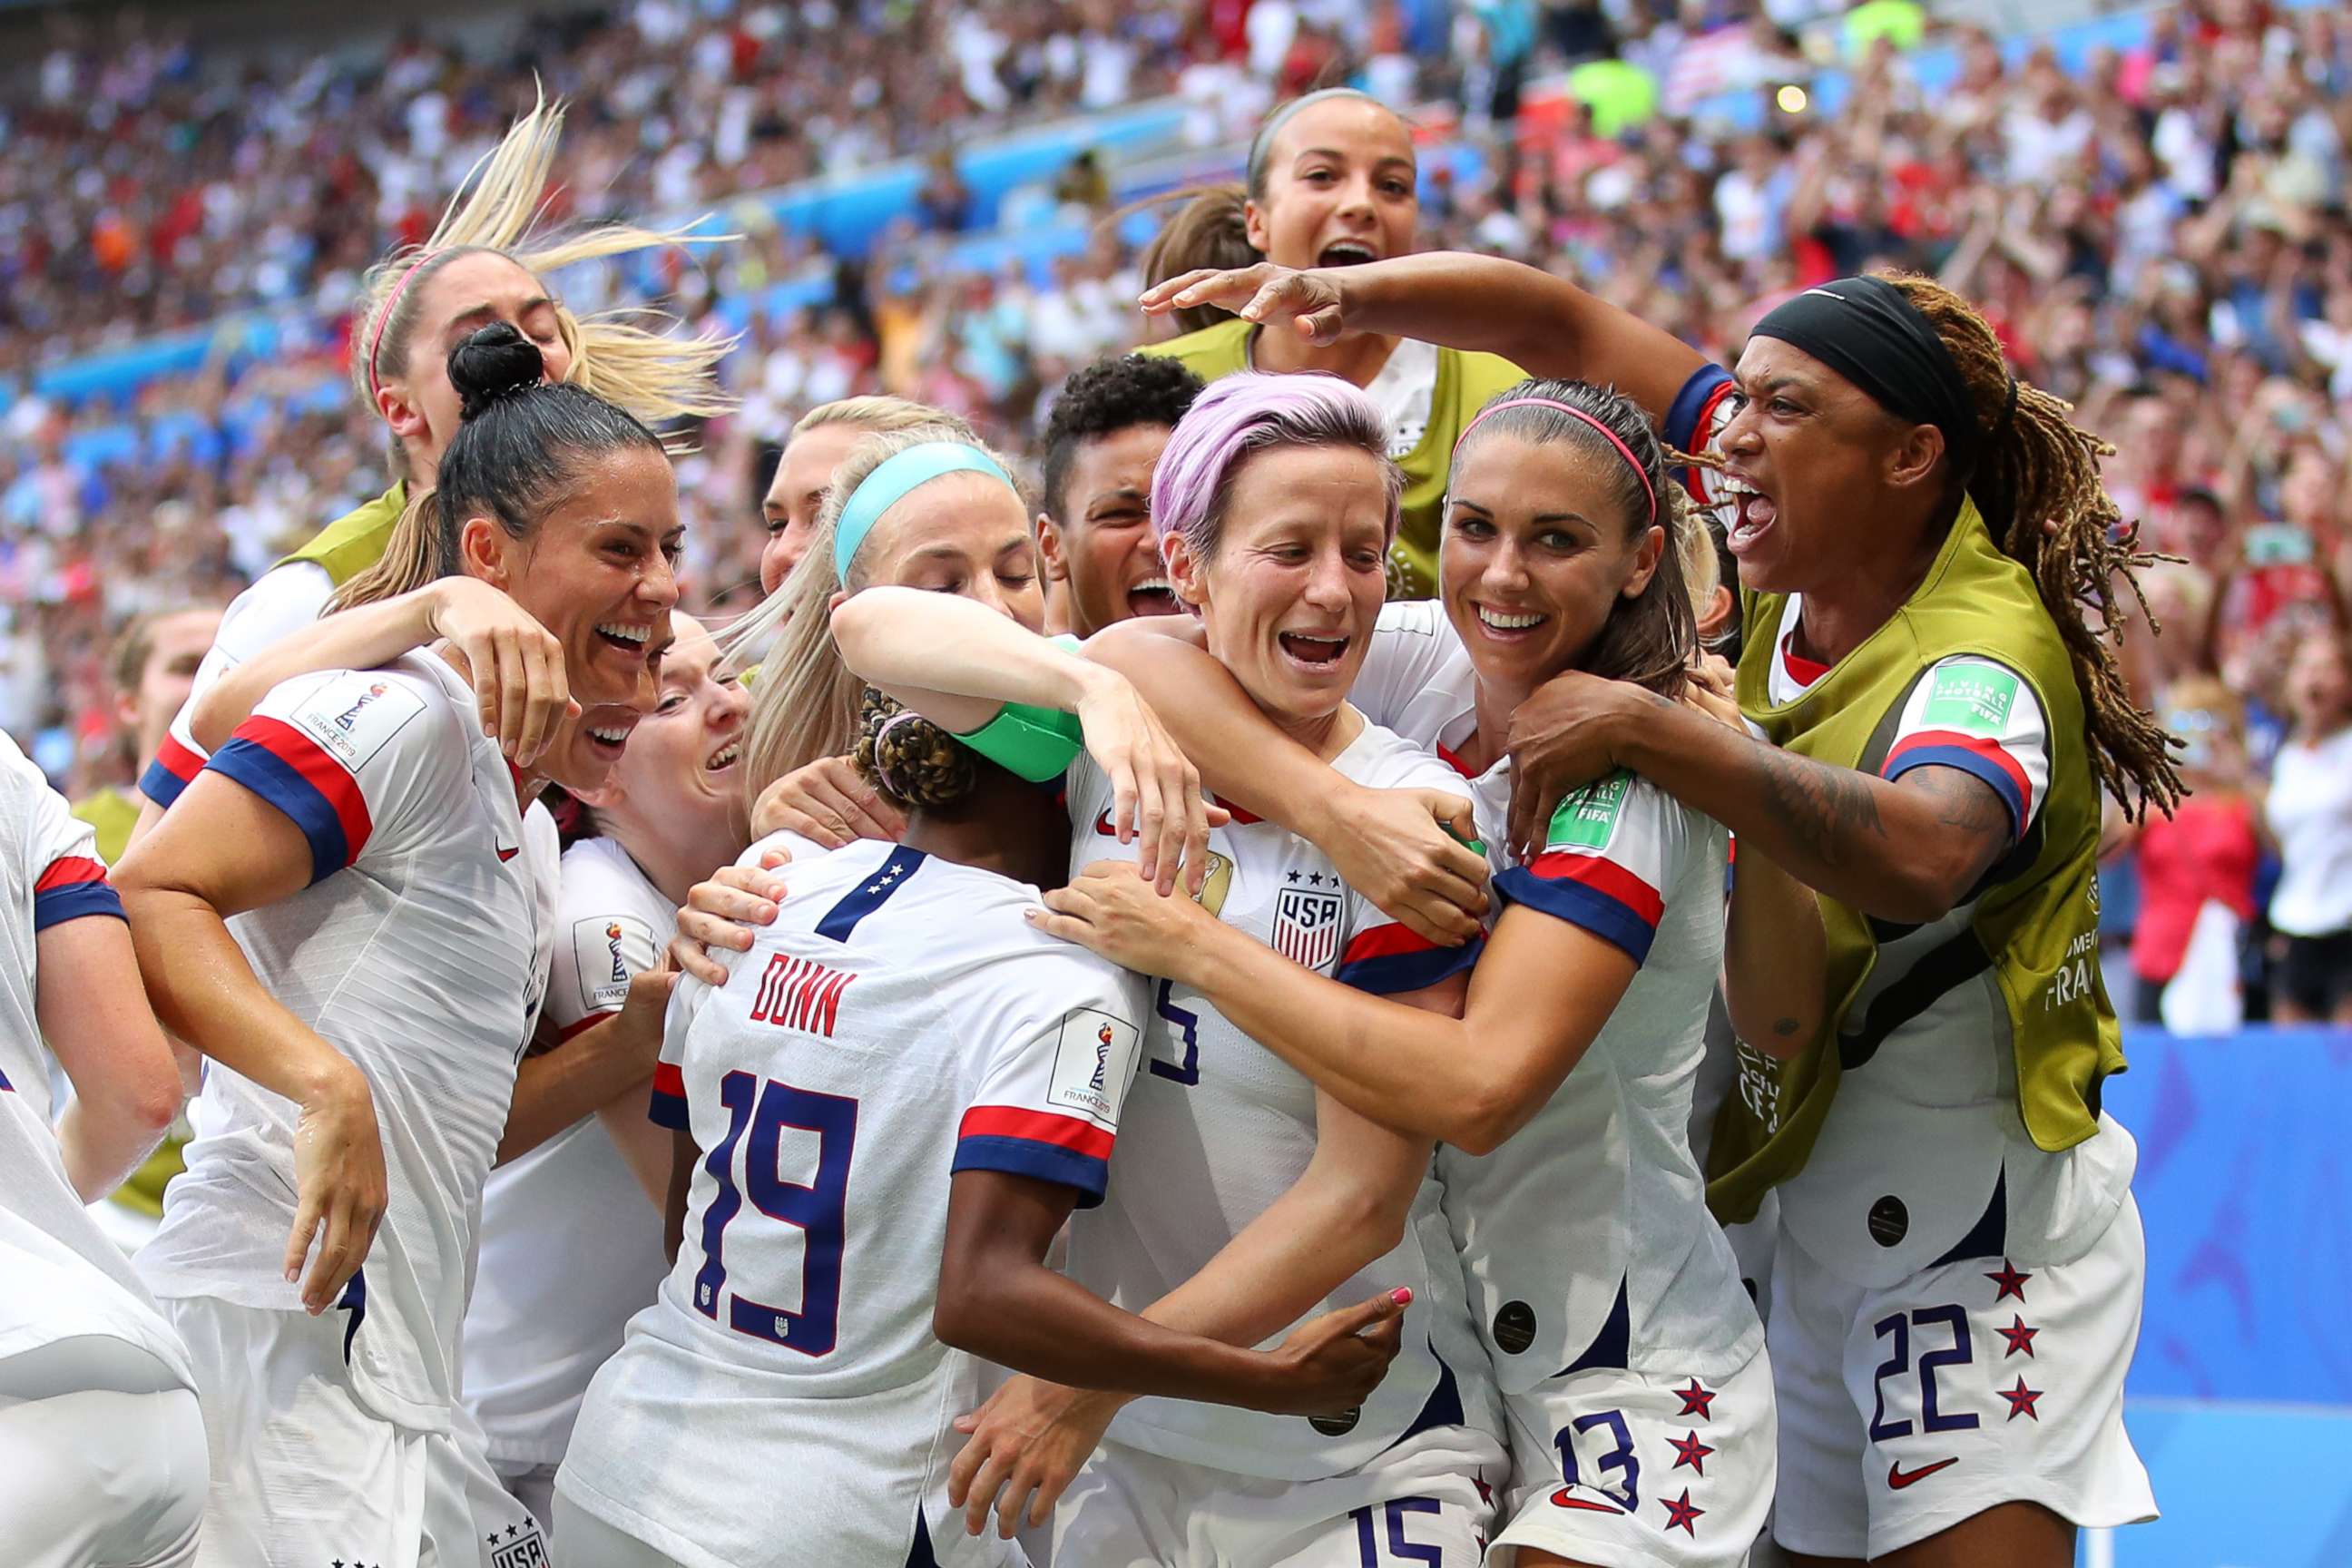 PHOTO: Megan Rapinoe of the U.S. celebrates with teammates after scoring her team's first goal during the 2019 FIFA Women's World Cup France Final match between the U.S. and The Netherlands at Stade de Lyon on July 07, 2019 in Lyon, France.